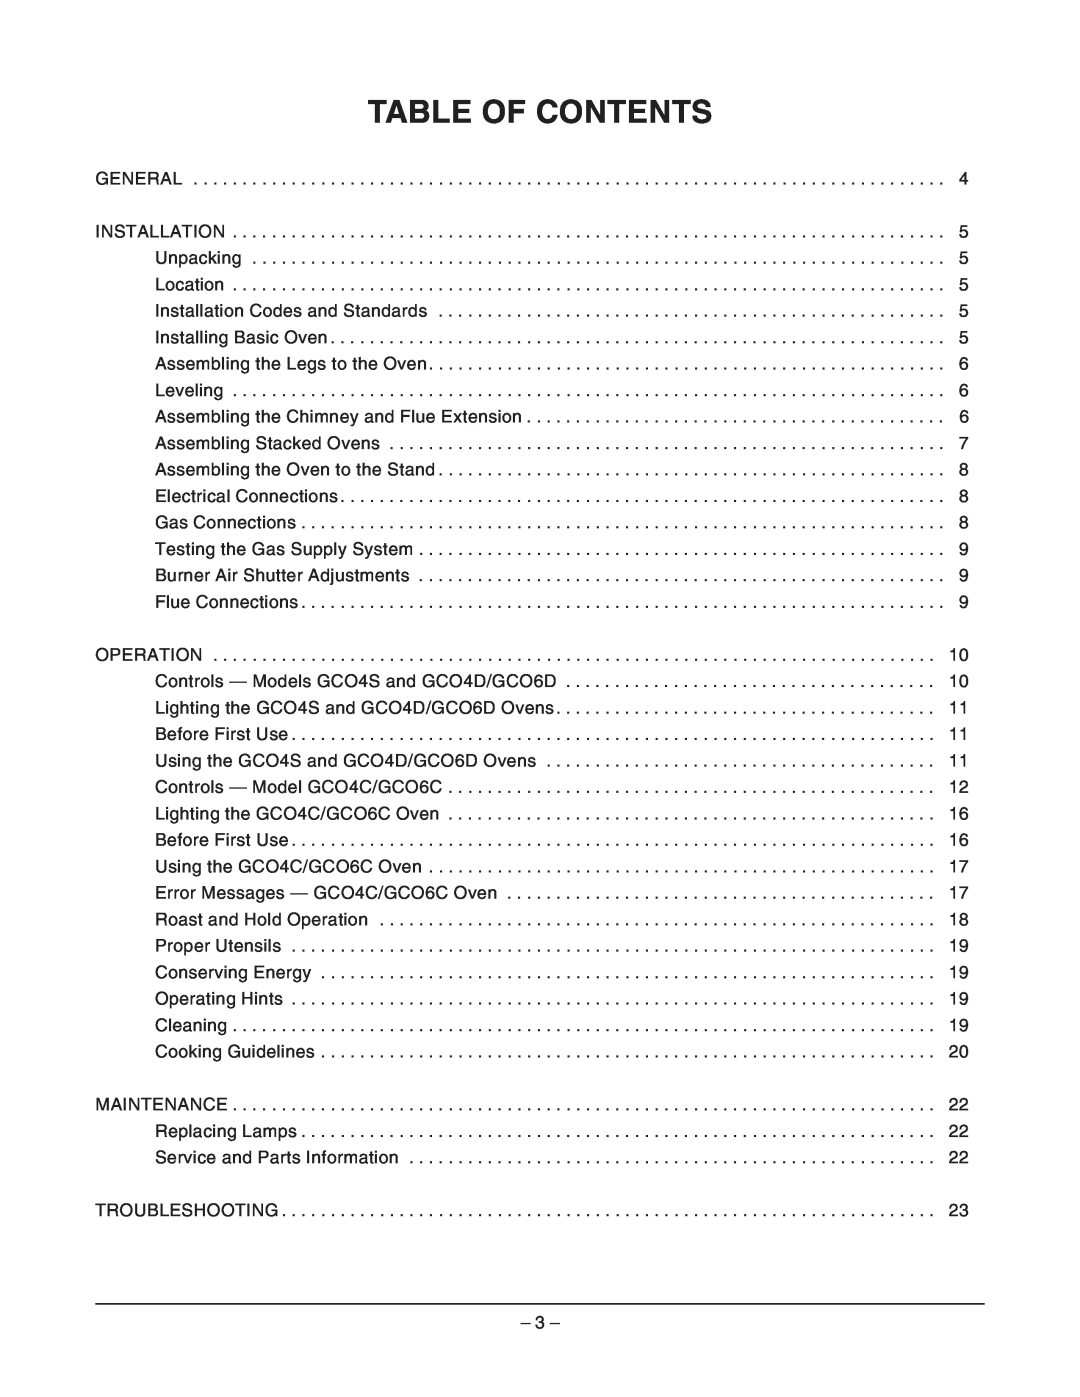 Vulcan-Hart GCO4C ML-52357, GCO6C ML-114730 Table Of Contents, General, OPERATION Controls - Models GCO4S and GCO4D/GCO6D 